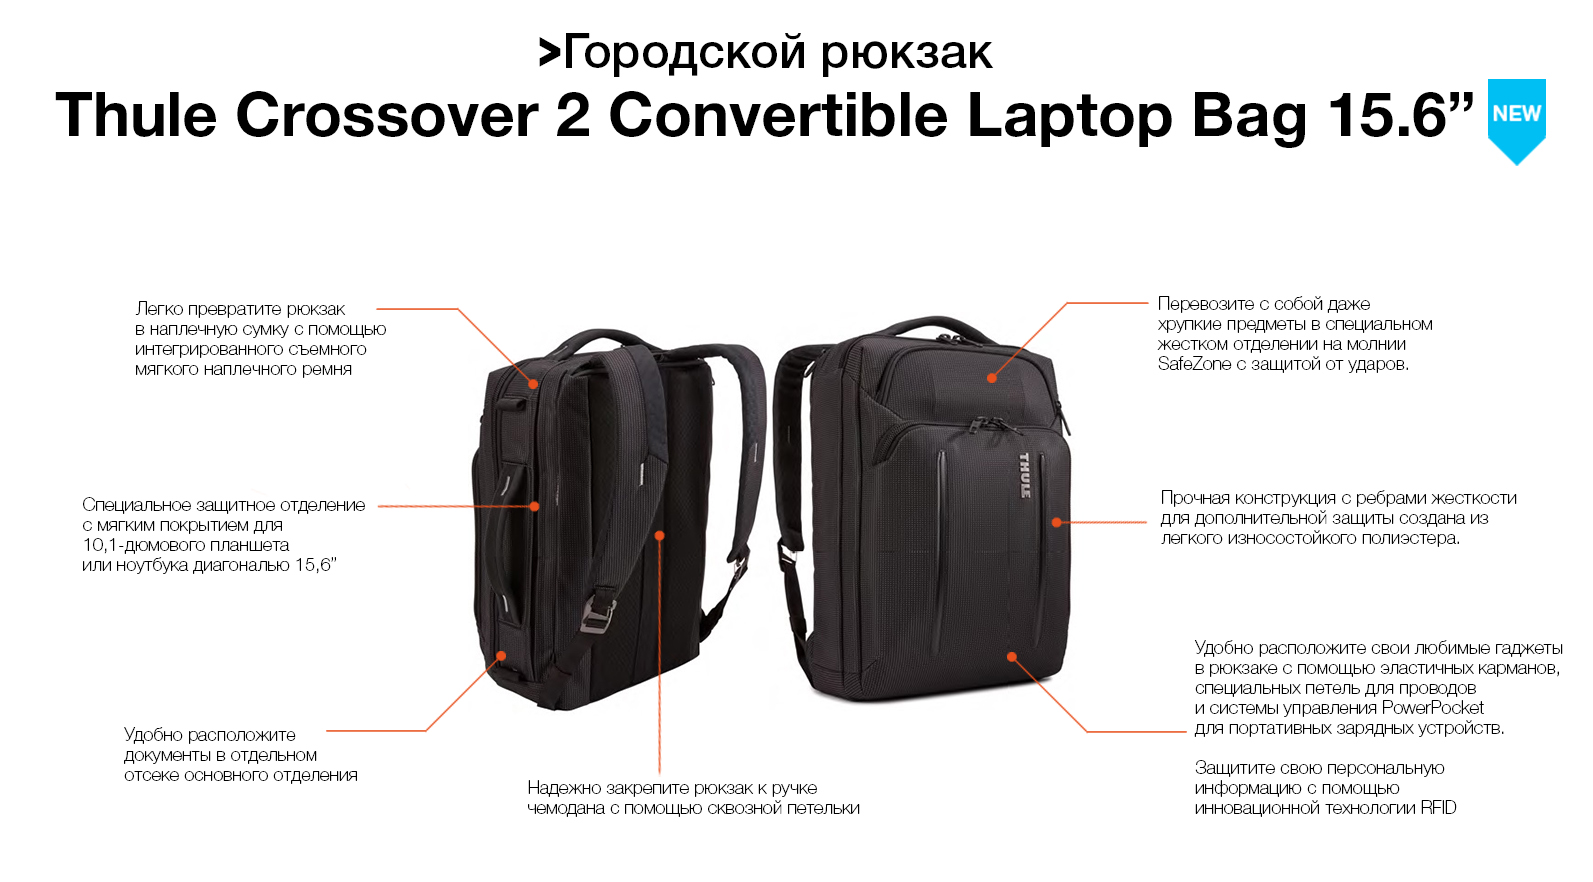 инфо Thule crossover 2 backpack convertible laptop bag 15.6'